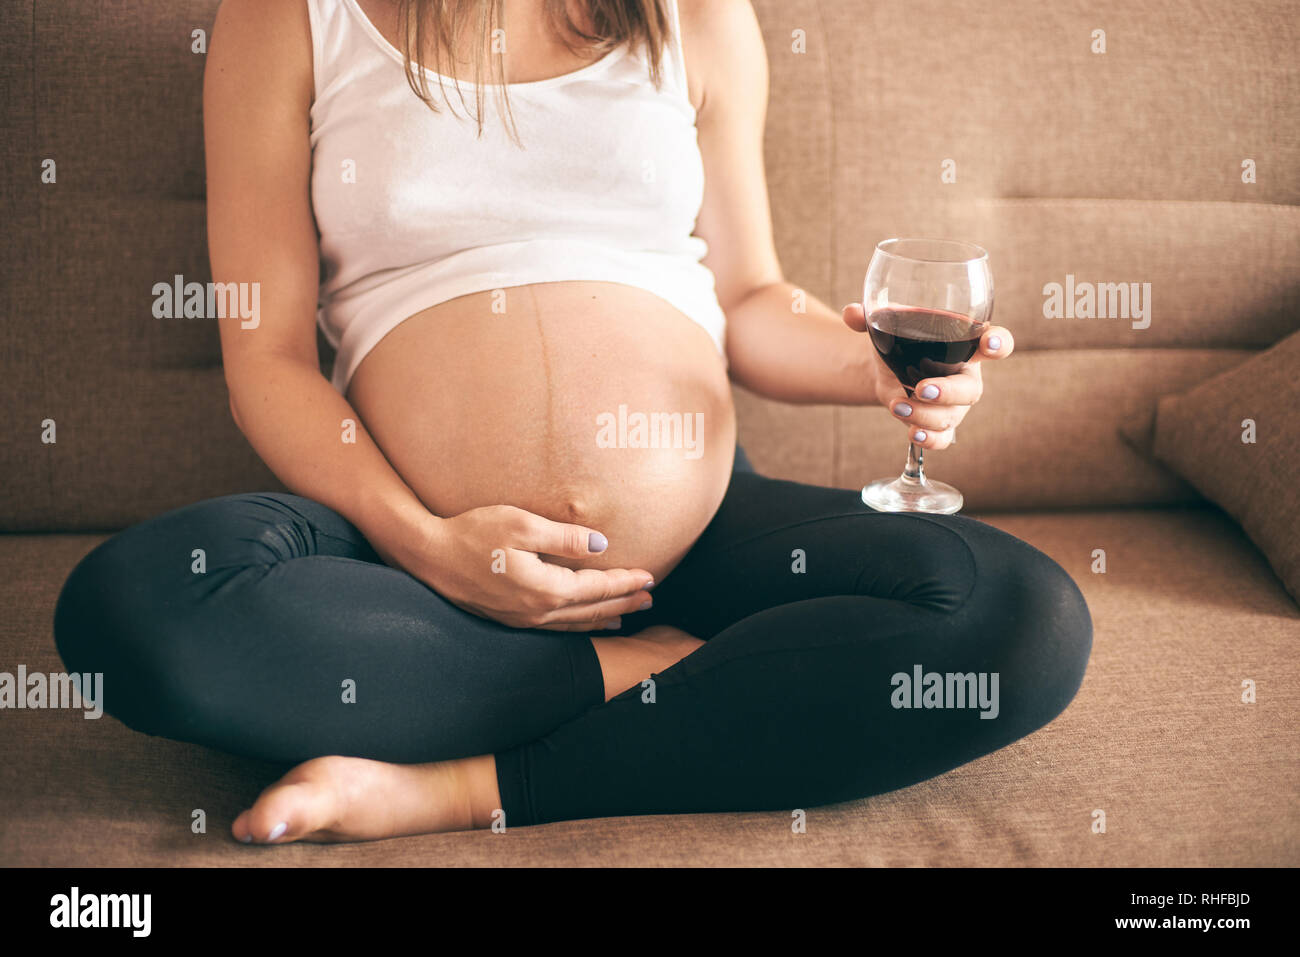 Cropped view of future mother in white shirt and black pants sitting on sofa at home and drinking alcohol. Pregnant woman drinking wine during pregnancy period. Concept of threat, unhealthy lifestyle. Stock Photo